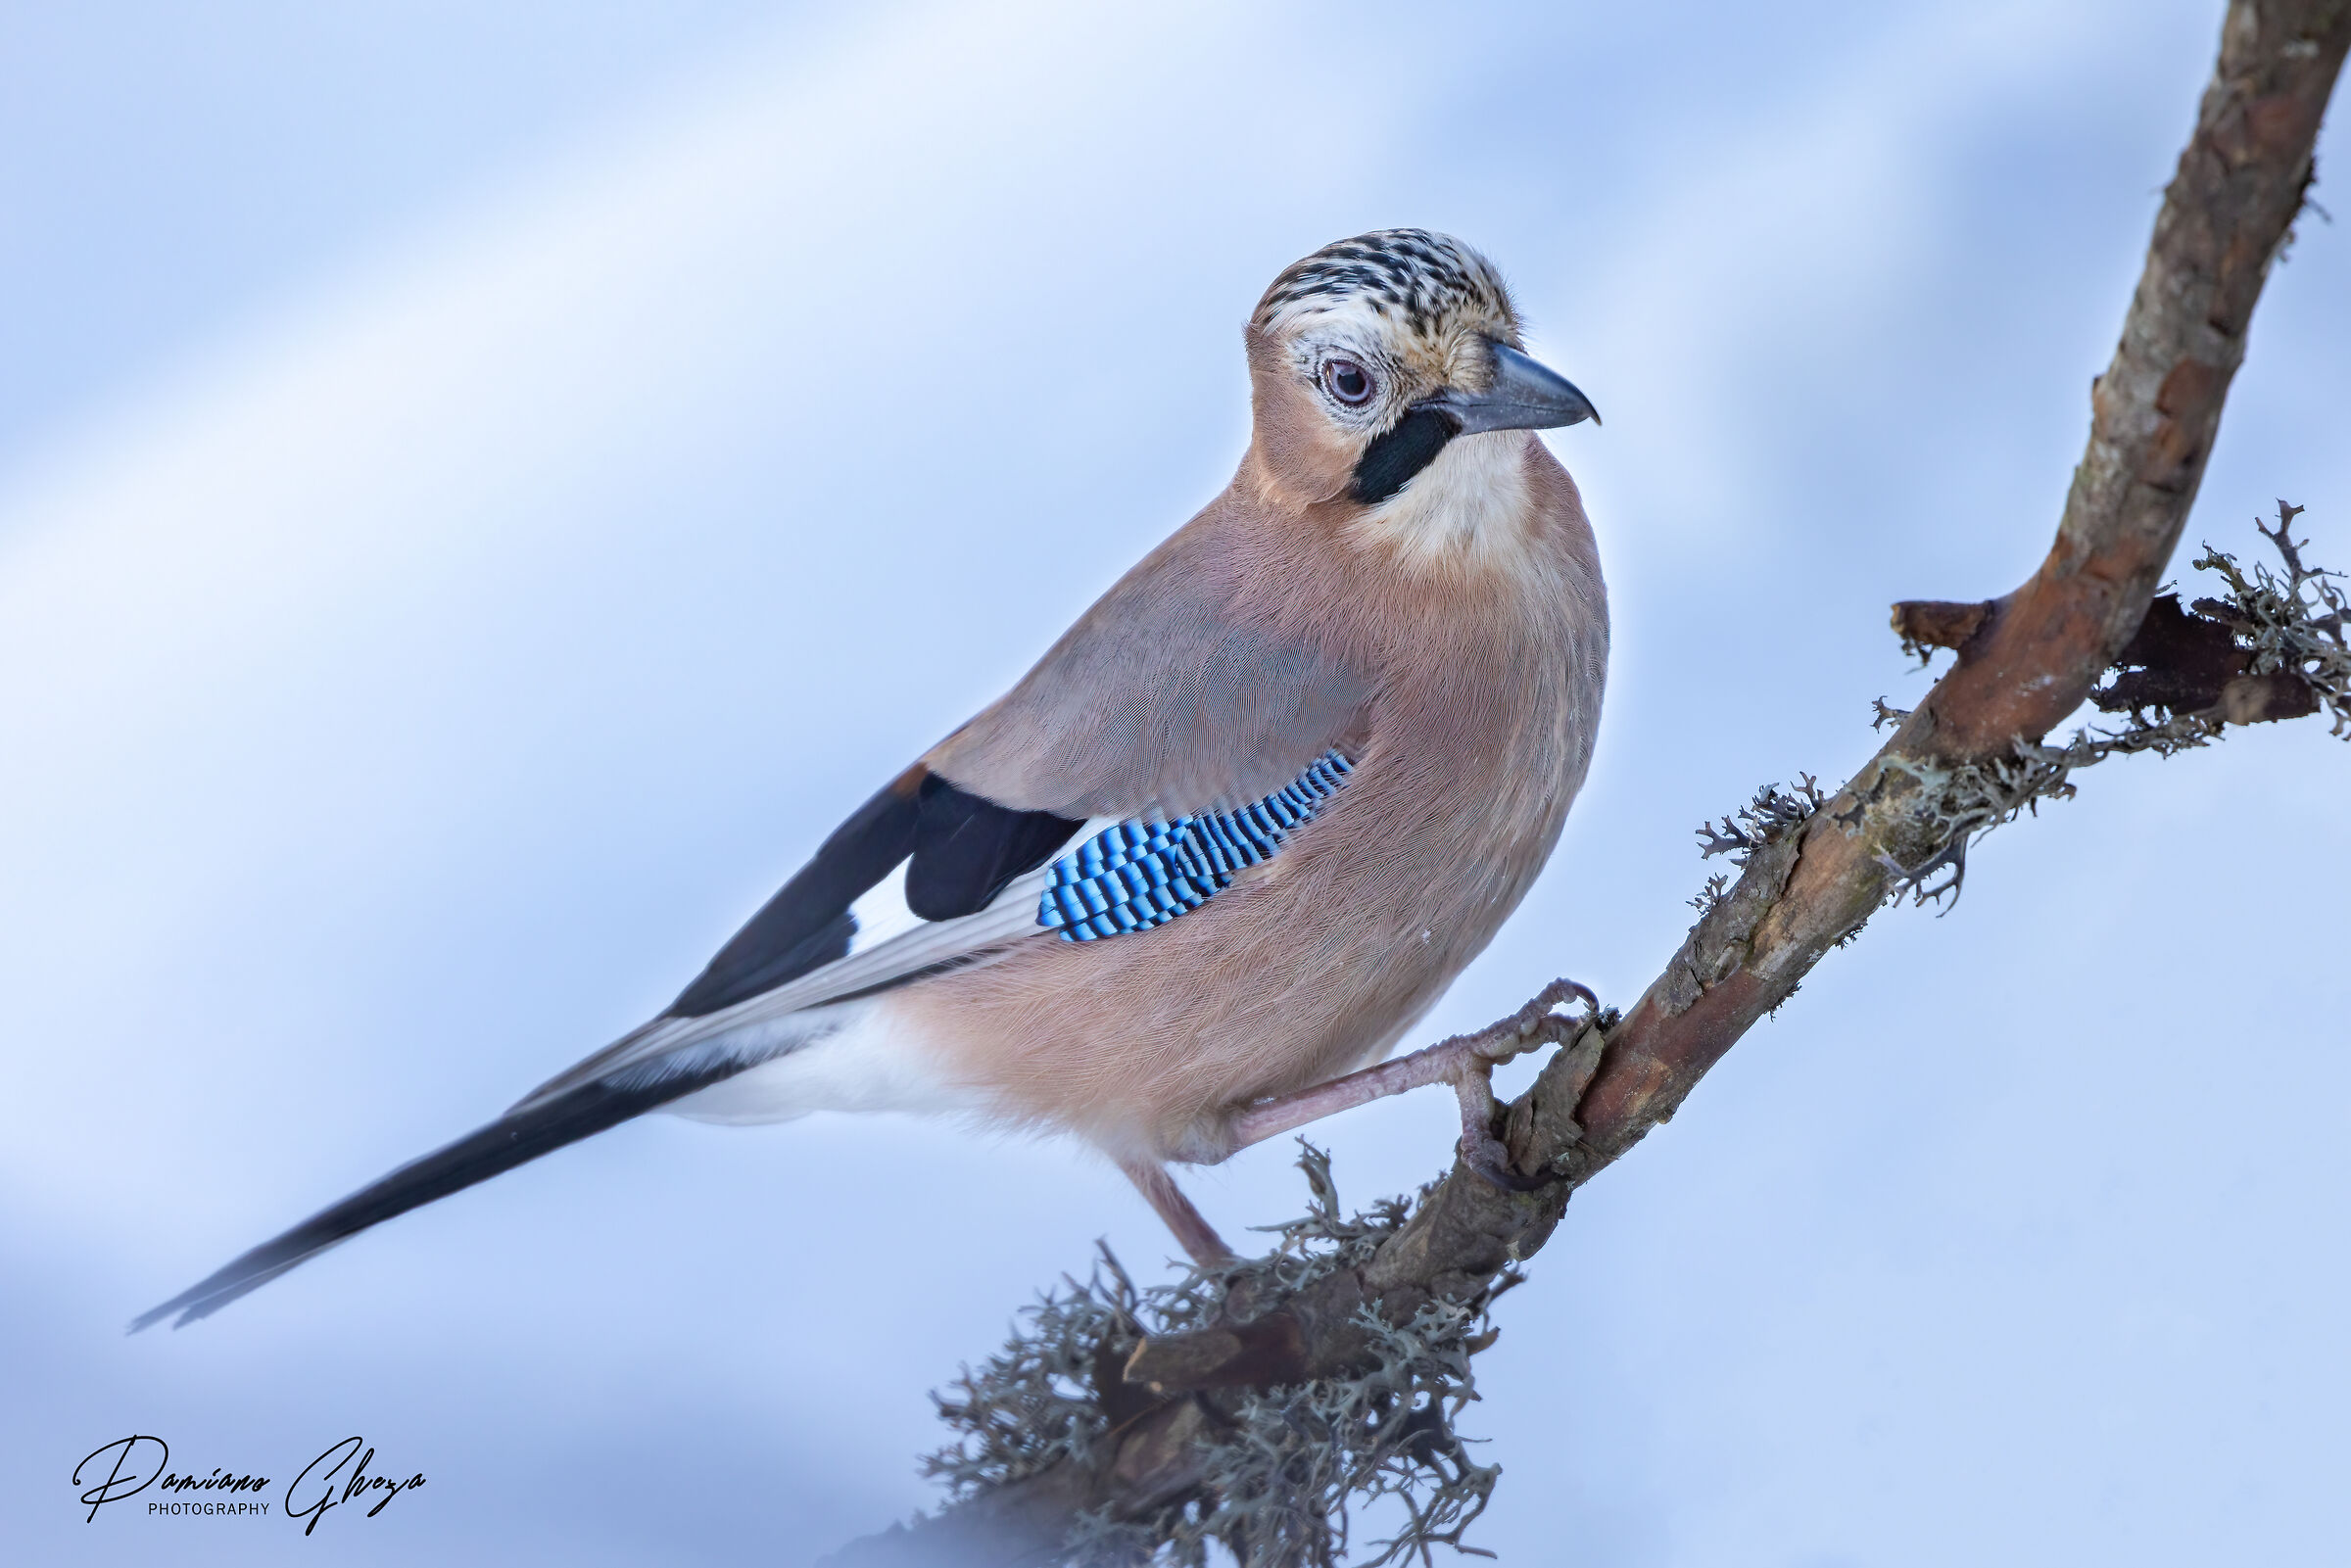 The beauty of the jay...